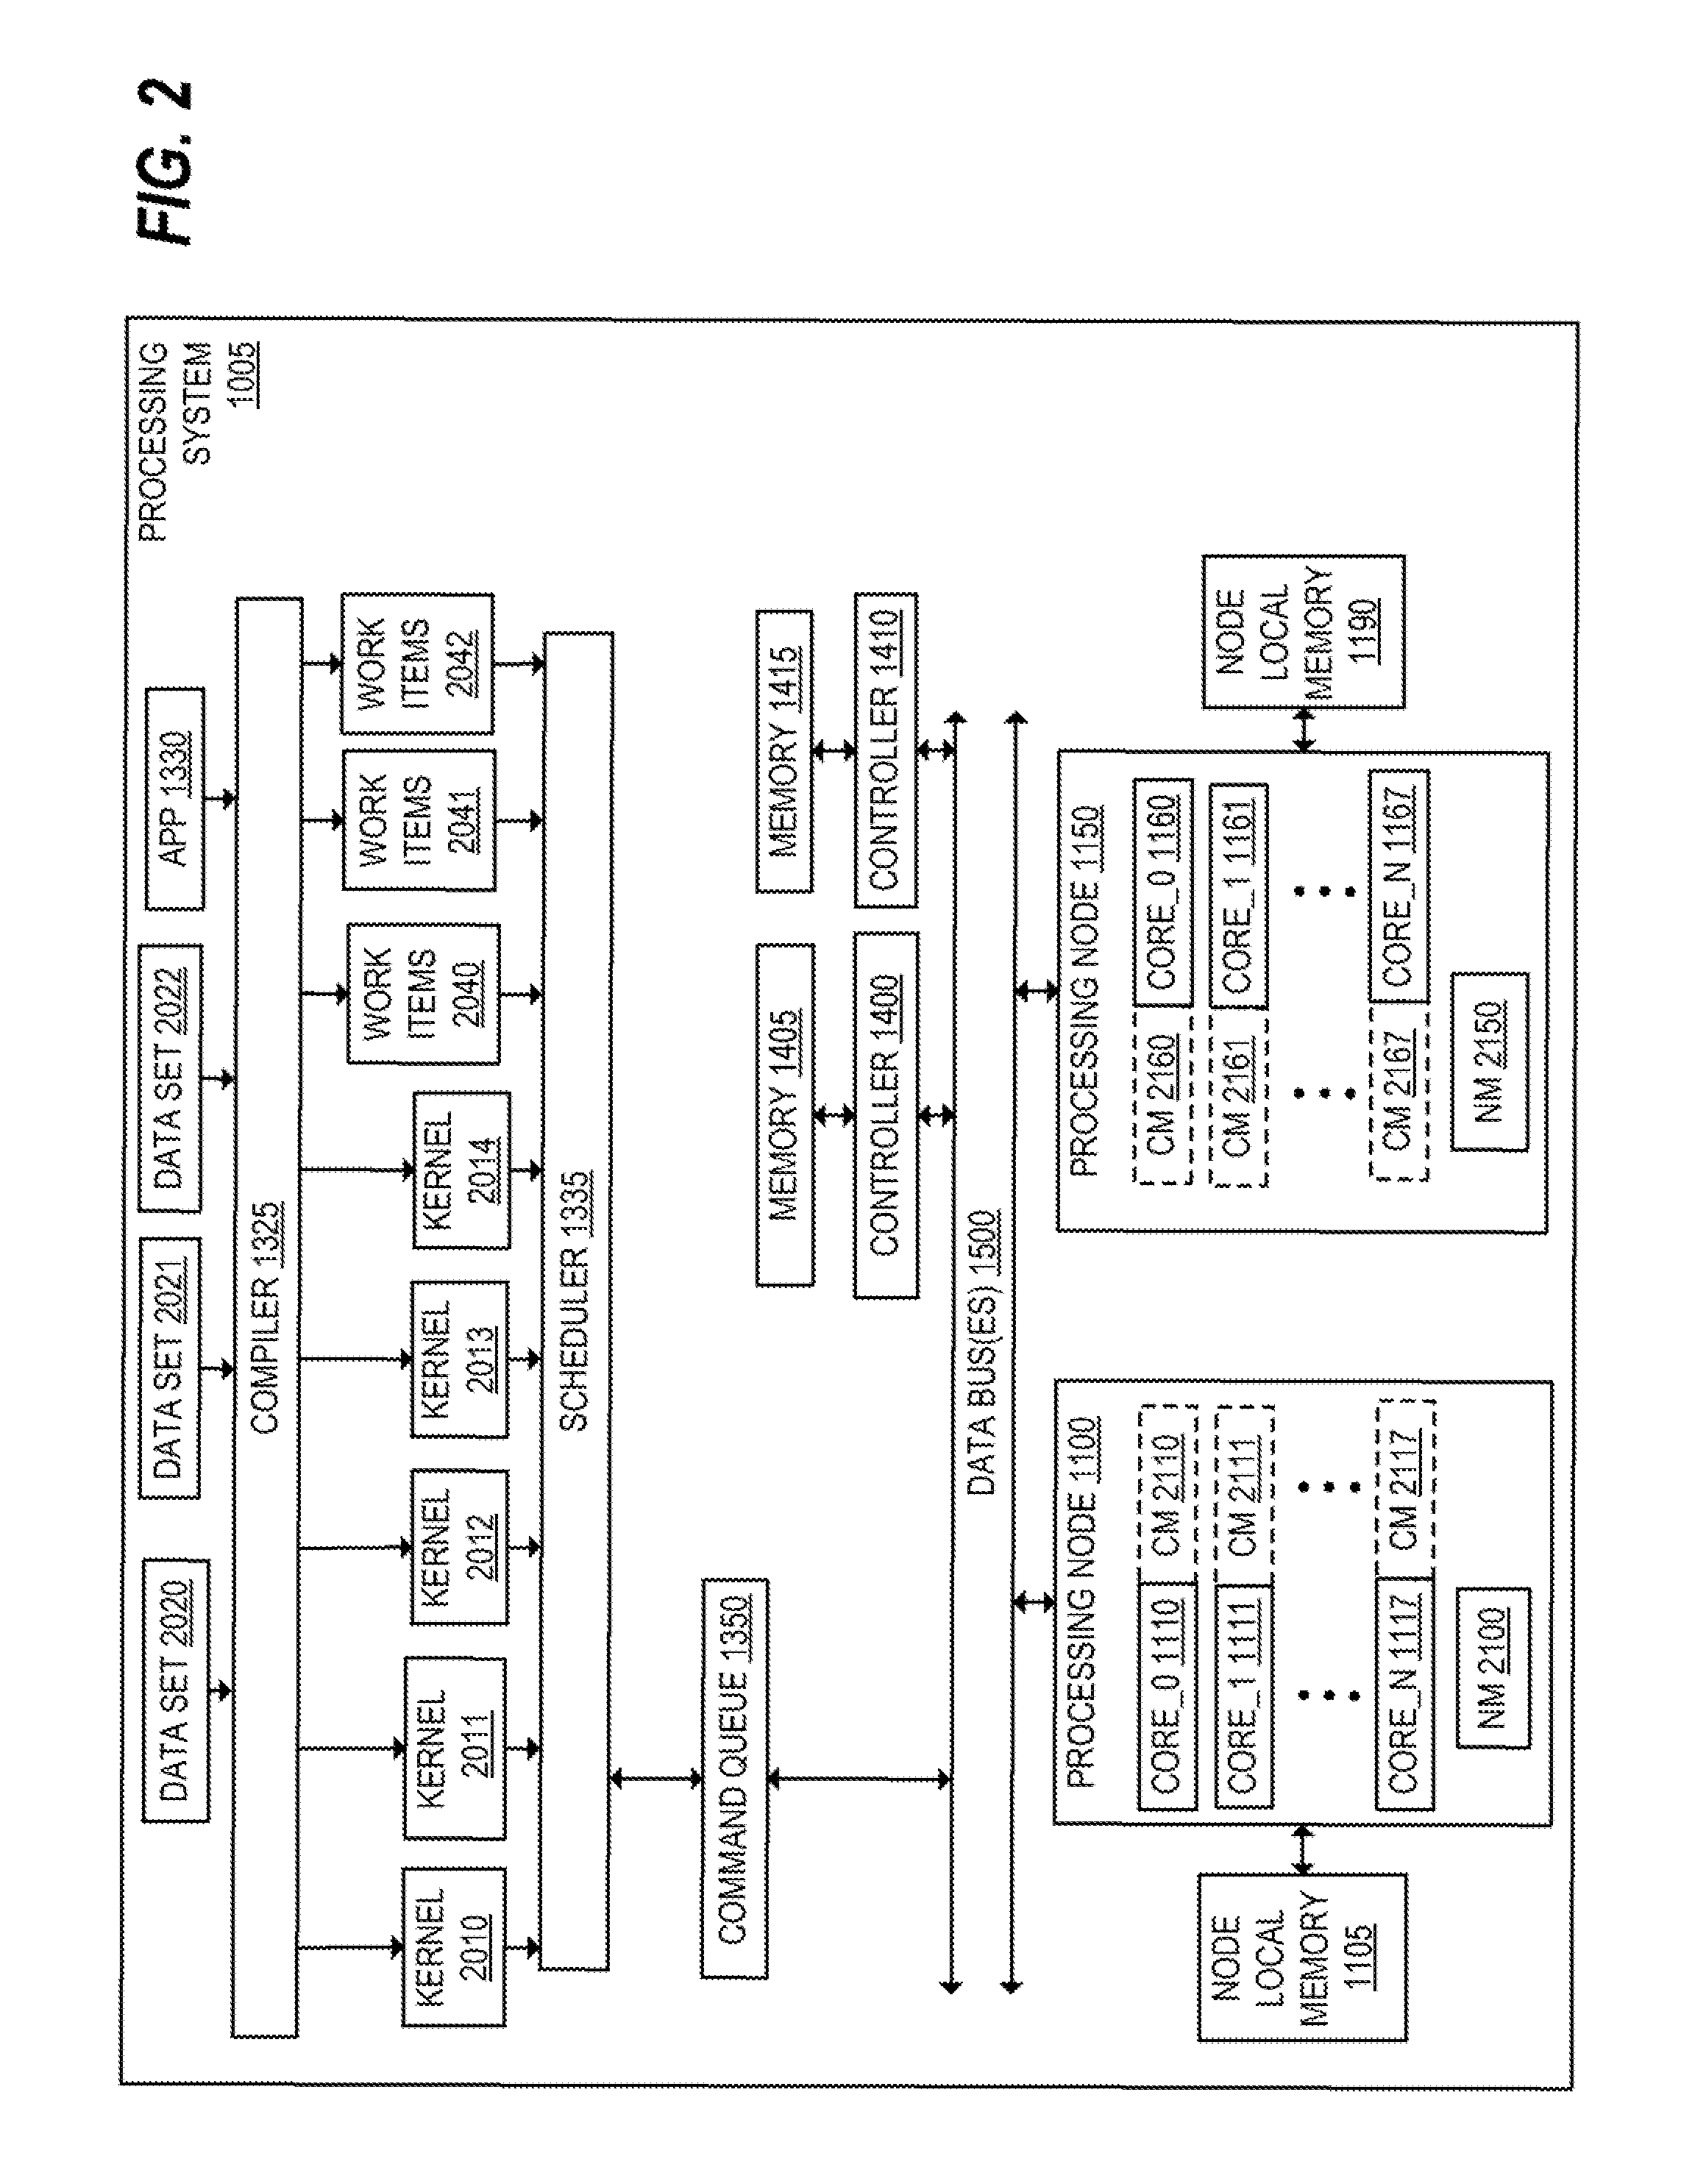 Method to customize function behavior based on cache and scheduling parameters of a memory argument